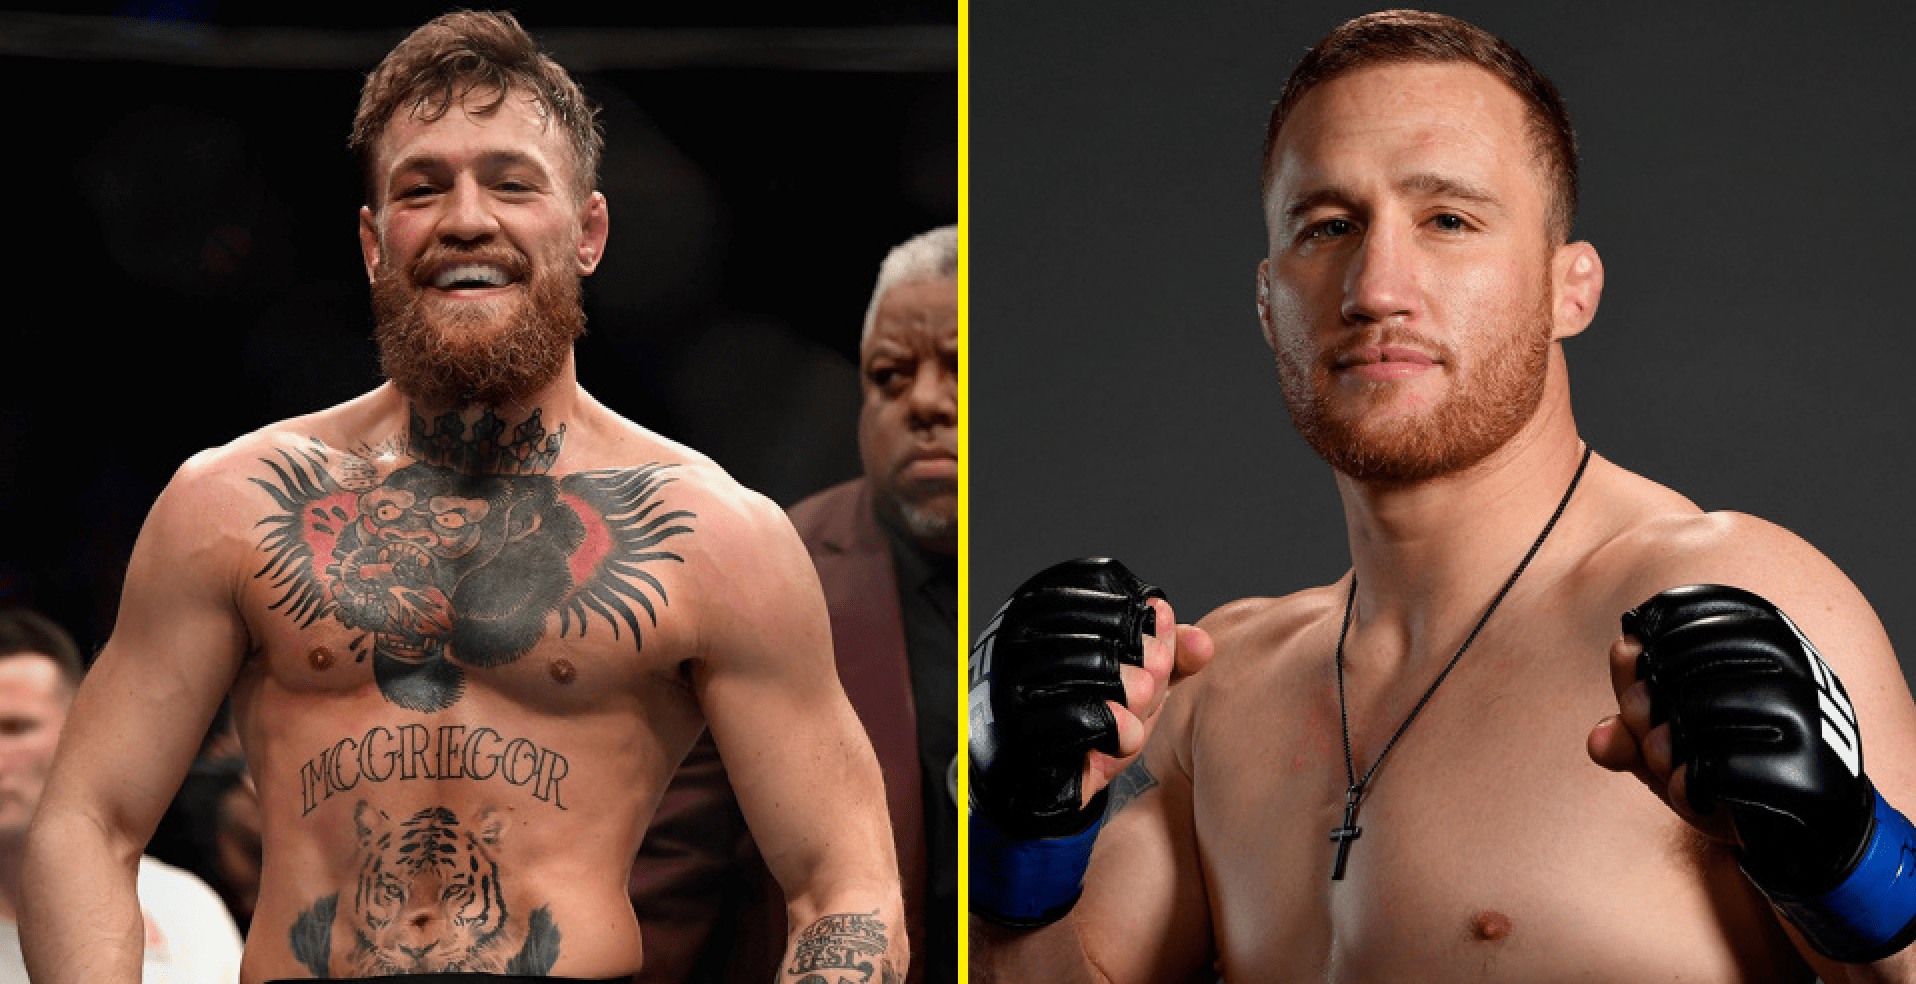 Gaethje Says He’ll Go To War With UFC If McGregor Gets Next Title Shot